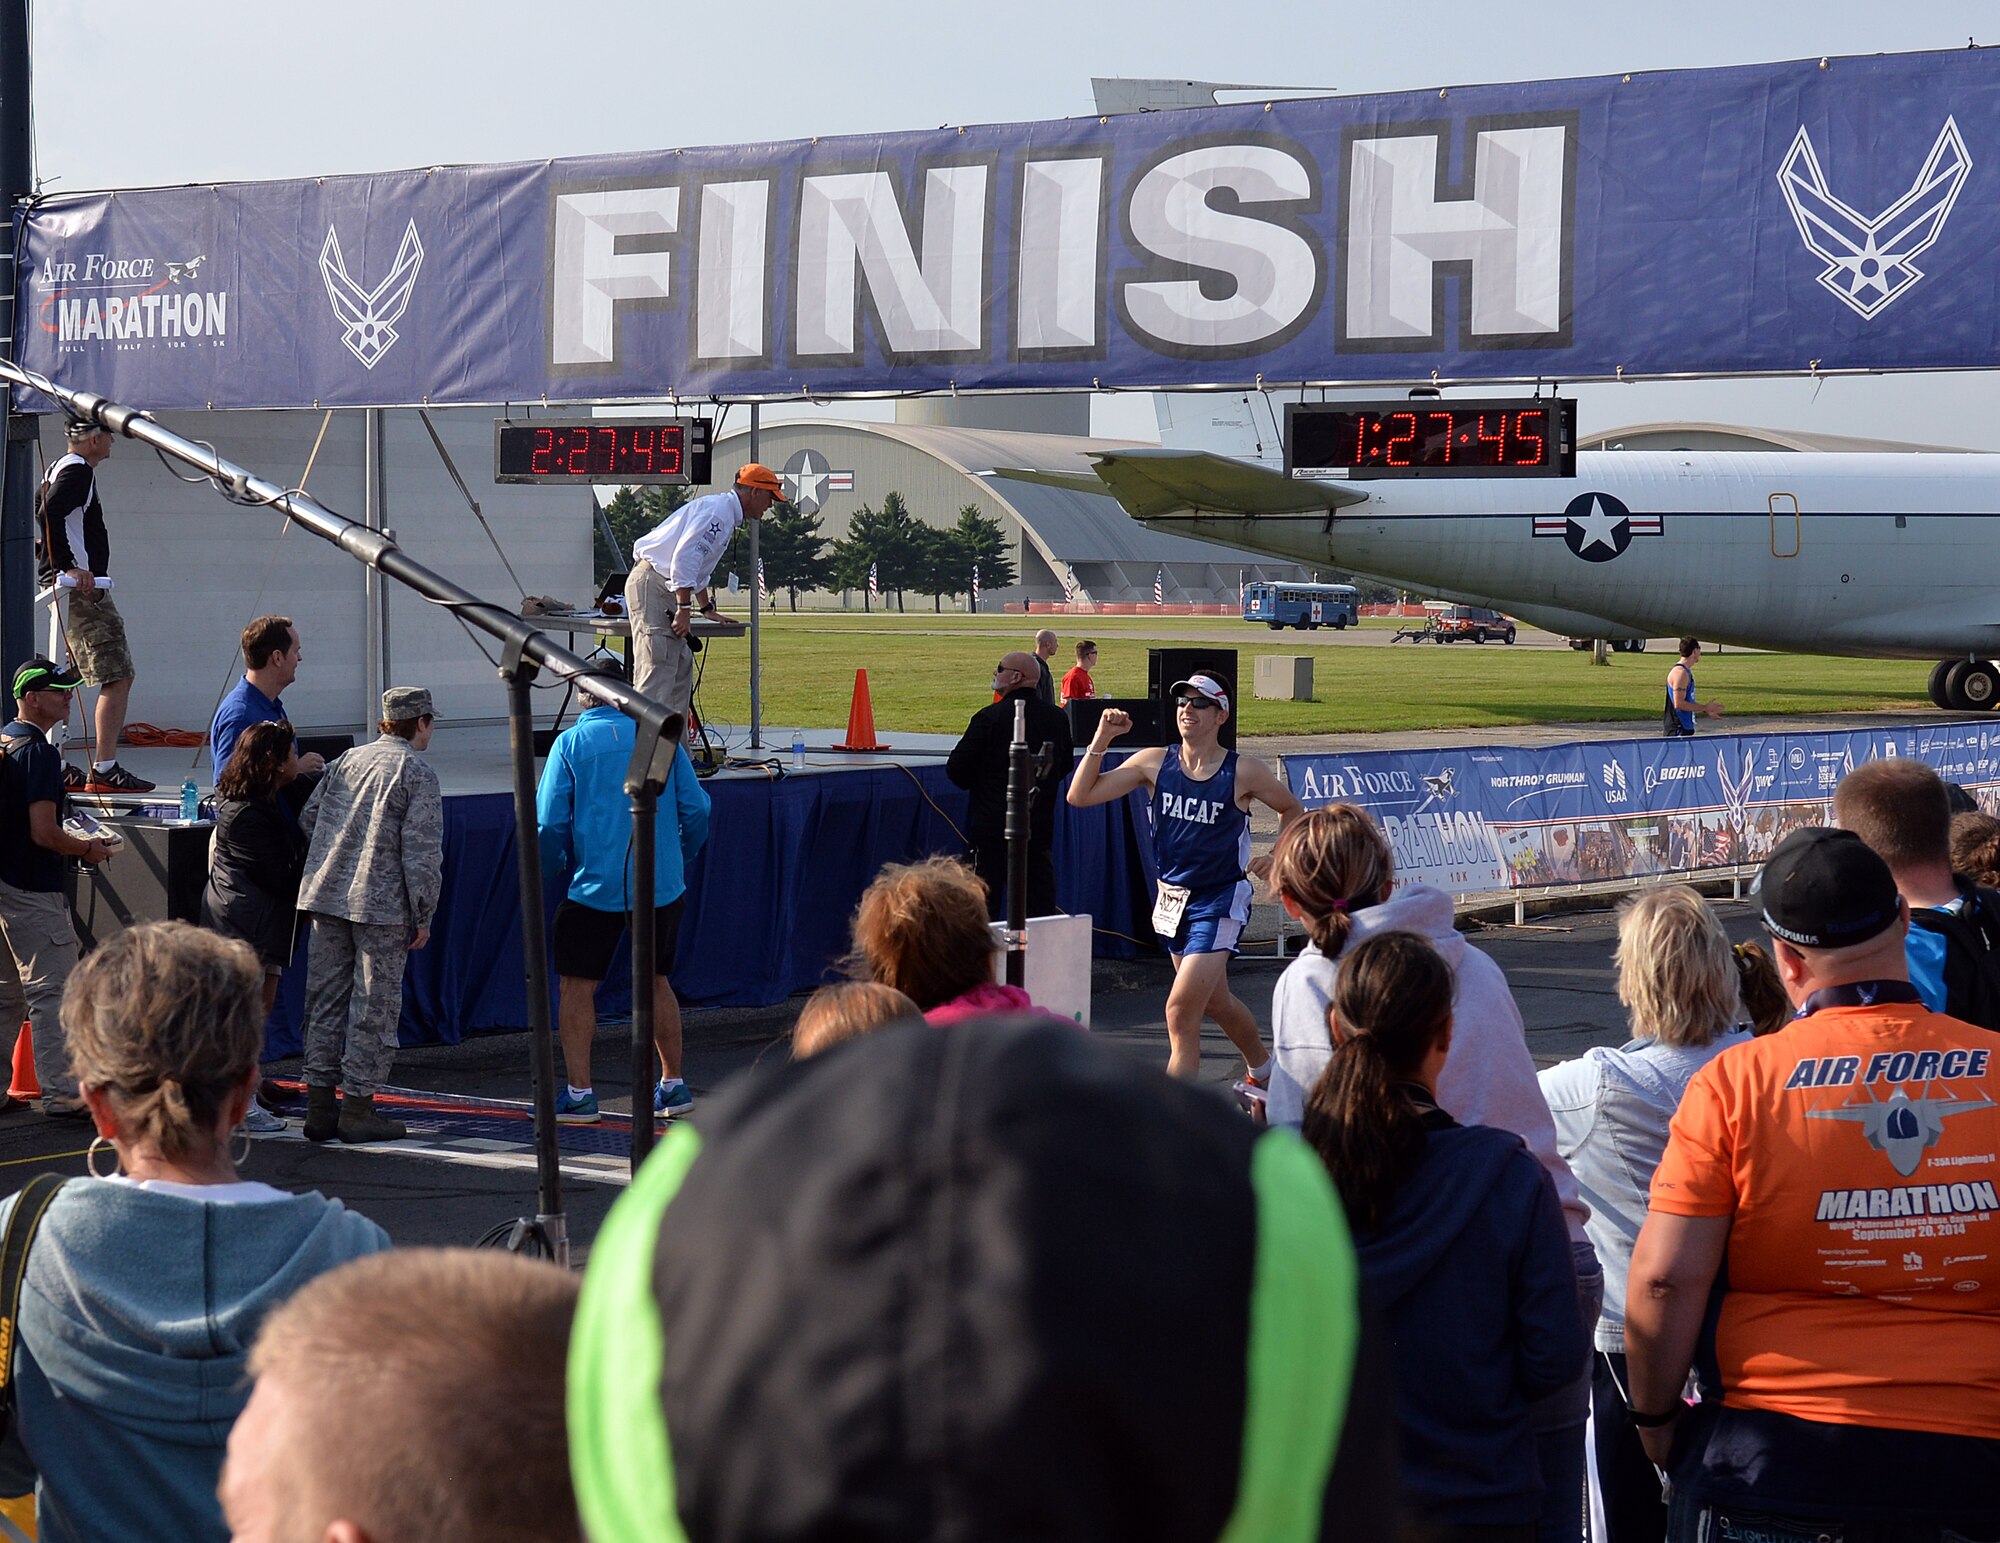 Staff Sgt. Joshua Johnson, Osan Air Base, Republic of Korea, finishes the Air Force Half Marathon, Wright-Patterson Air Force Base, Ohio, Sept. 20, 2014. Johnson was part of the Pacific Air Forces team that won 1st place in the half marathon Major Command team challenge. (Courtesy photo from Lois Johnson)